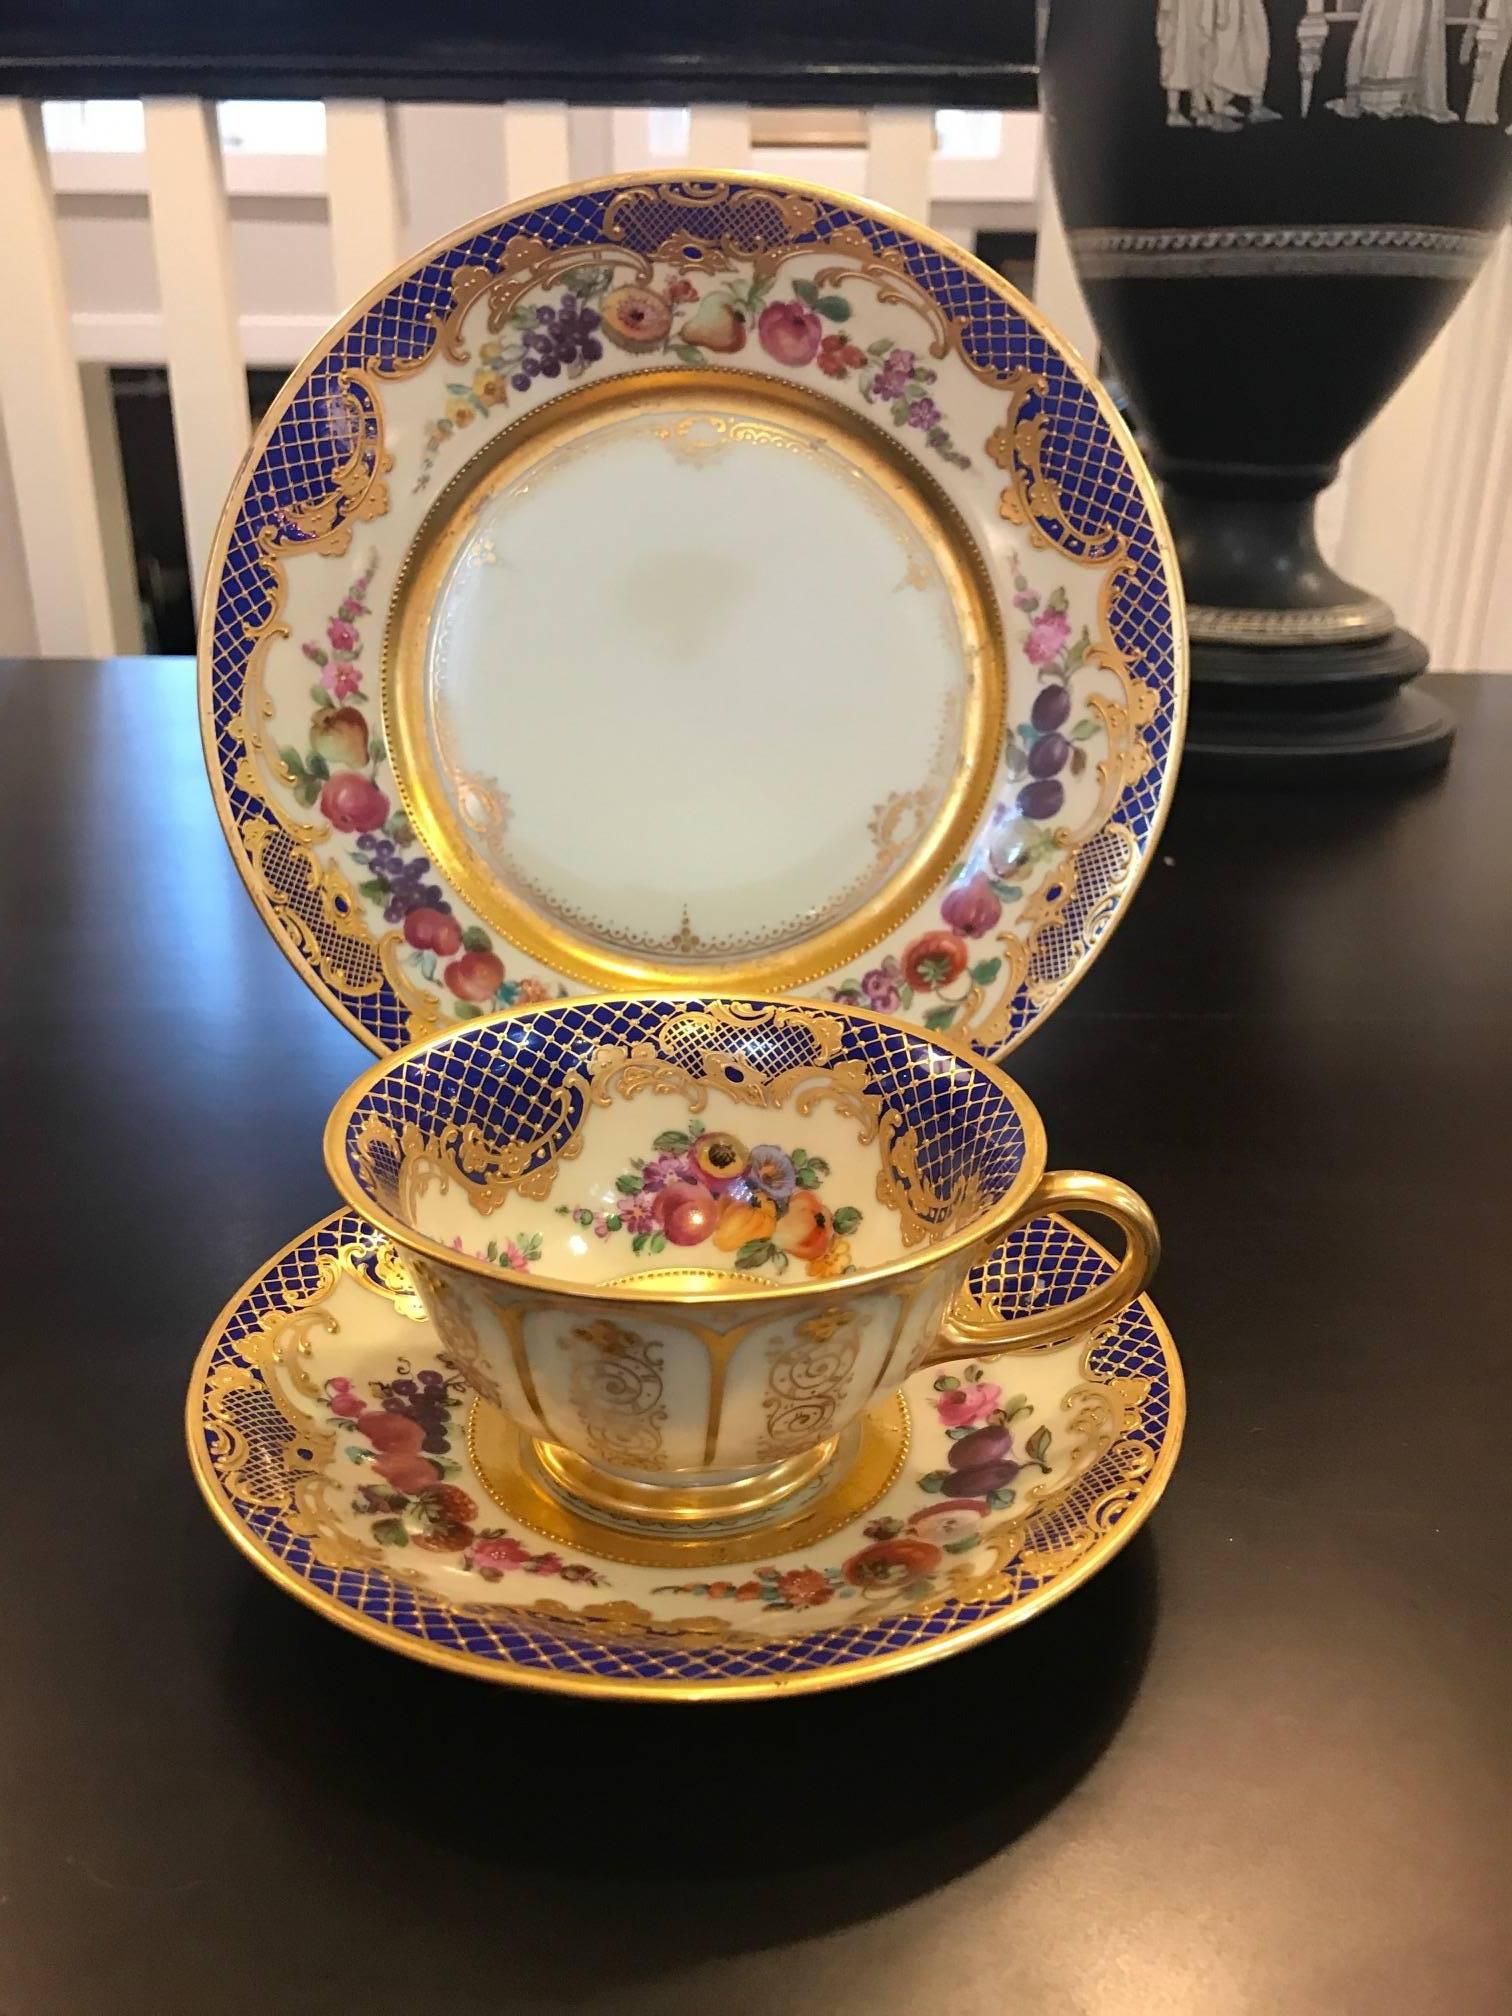 A set of 11 tea cups and saucers and dessert plates with hand-painted and gilt decoration. Exceptional quality and highly skilled artistic detail. These are painted by the best artist available at the time, Ambrosius Lamm.
Has blue overglaze with